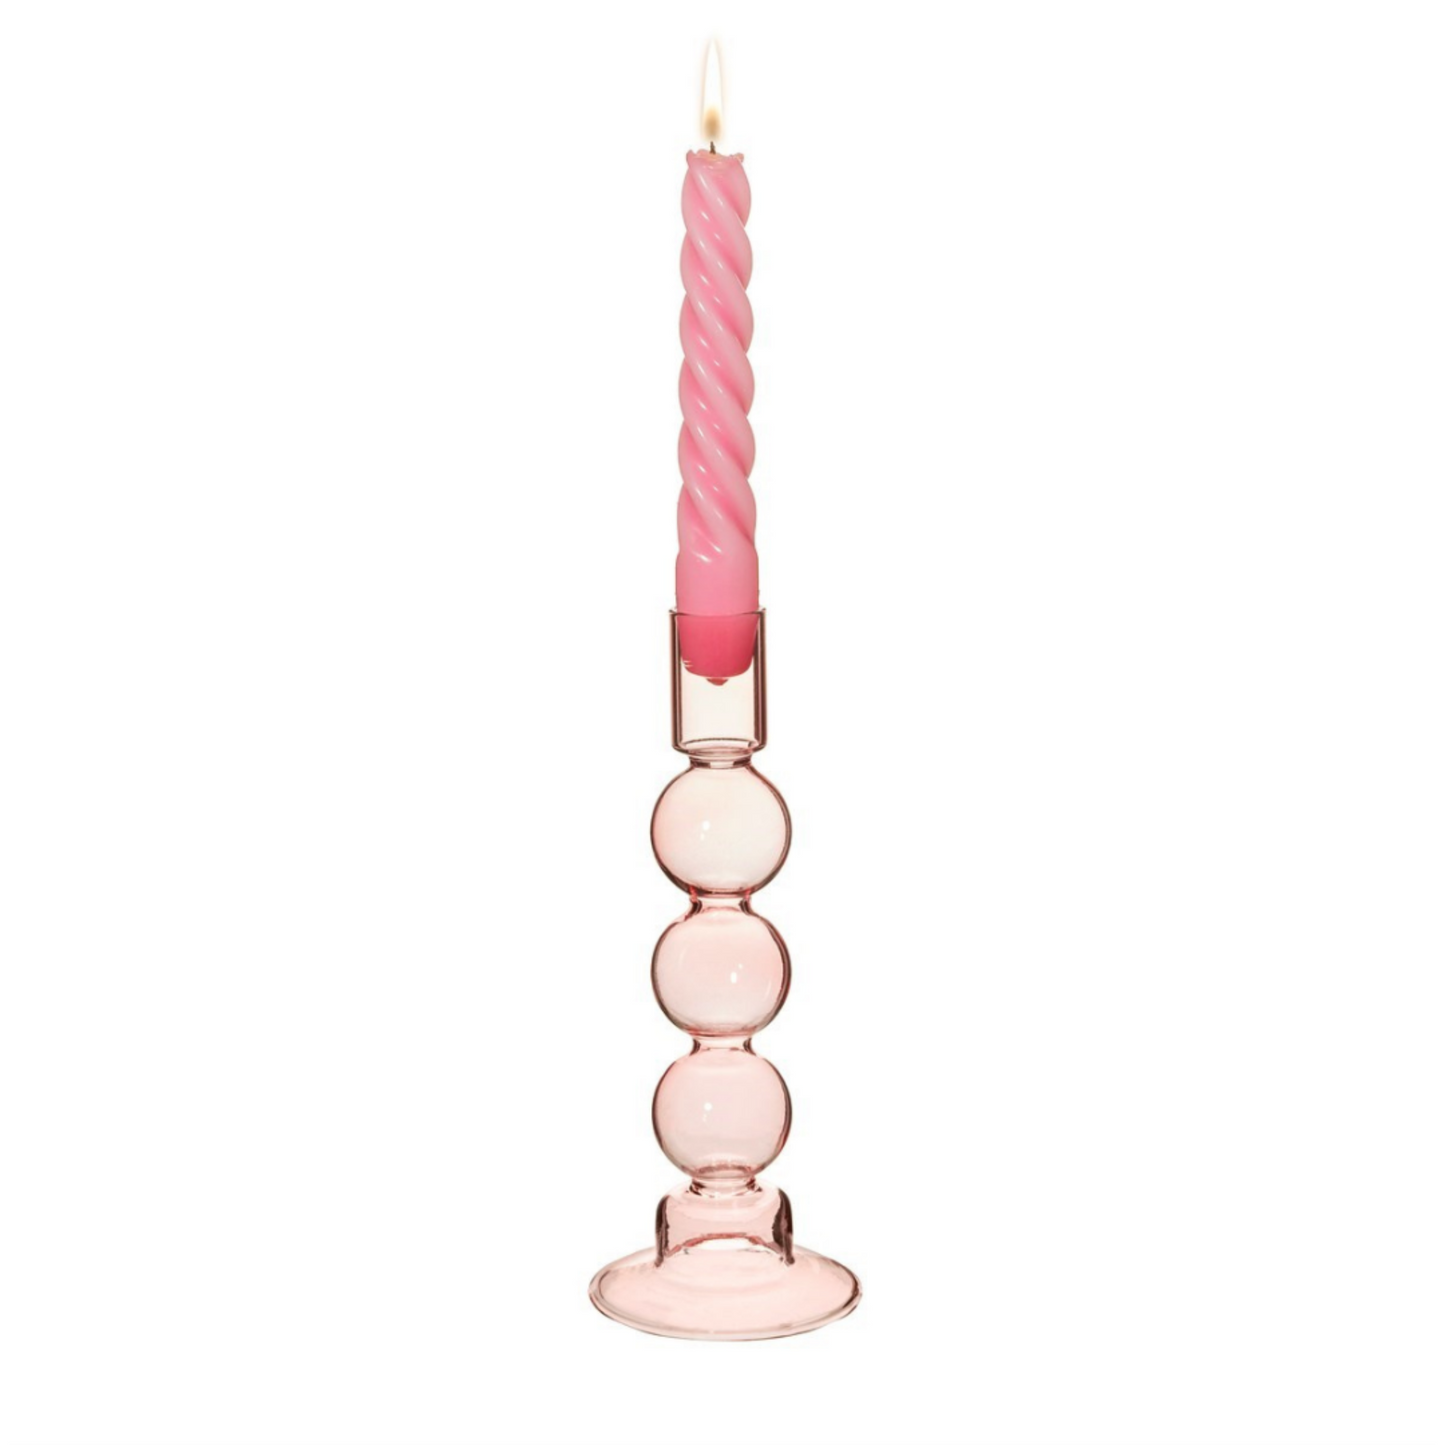 the candle holder housing a twisted pink candle